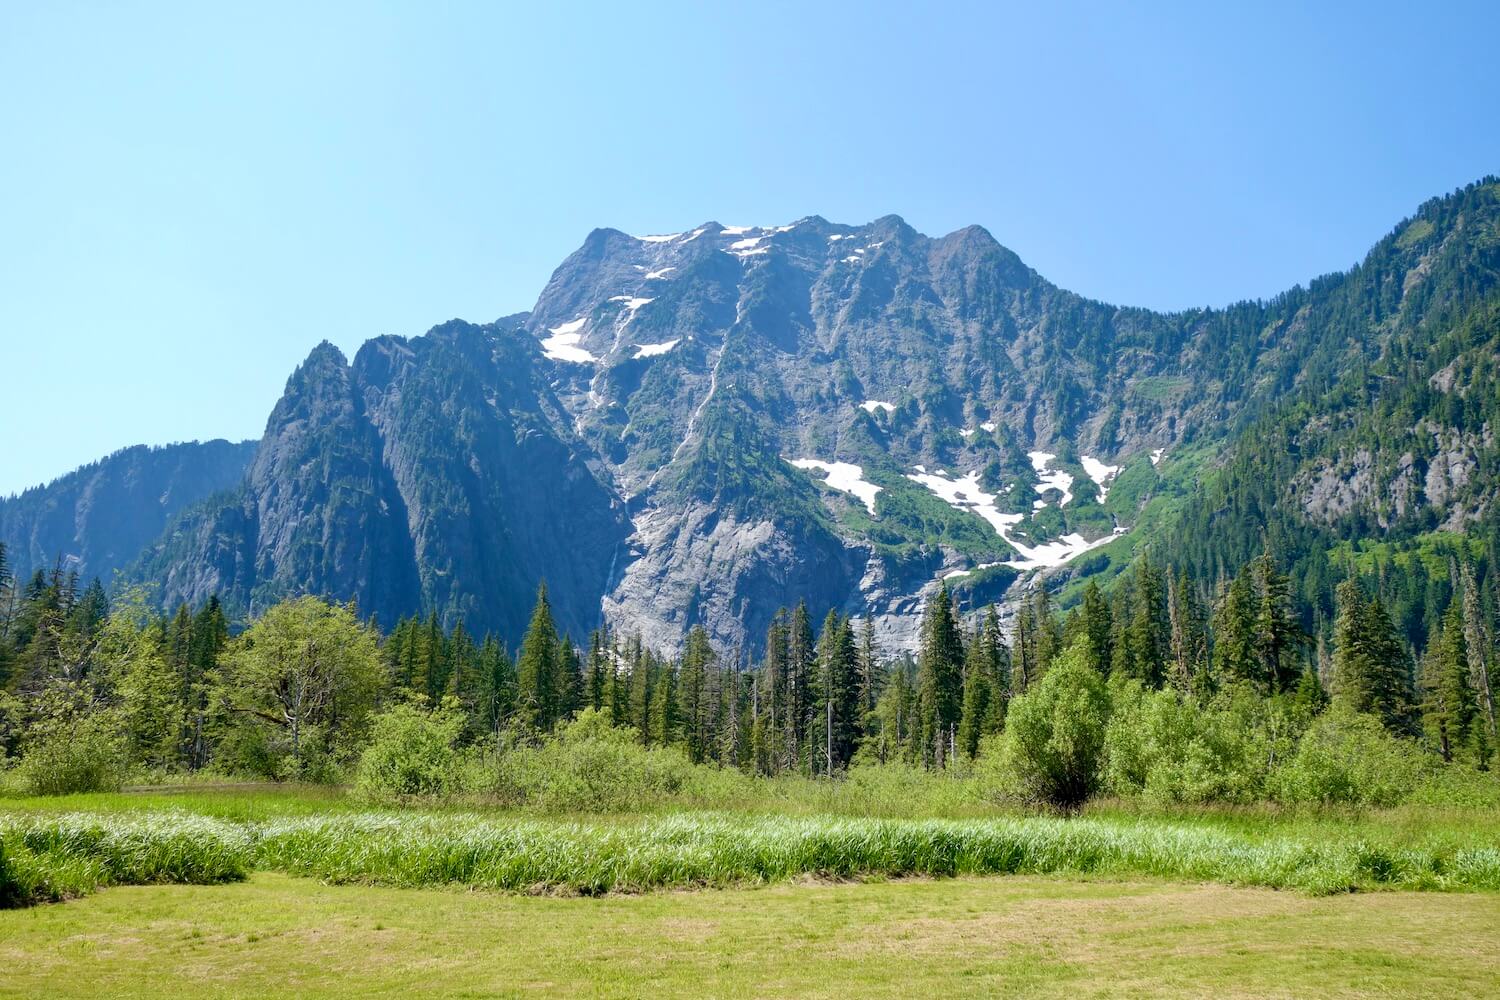 Big Four Mountain commands this landscape photo with patches of snow amongst fir forests and a mowed meadow in the foreground.